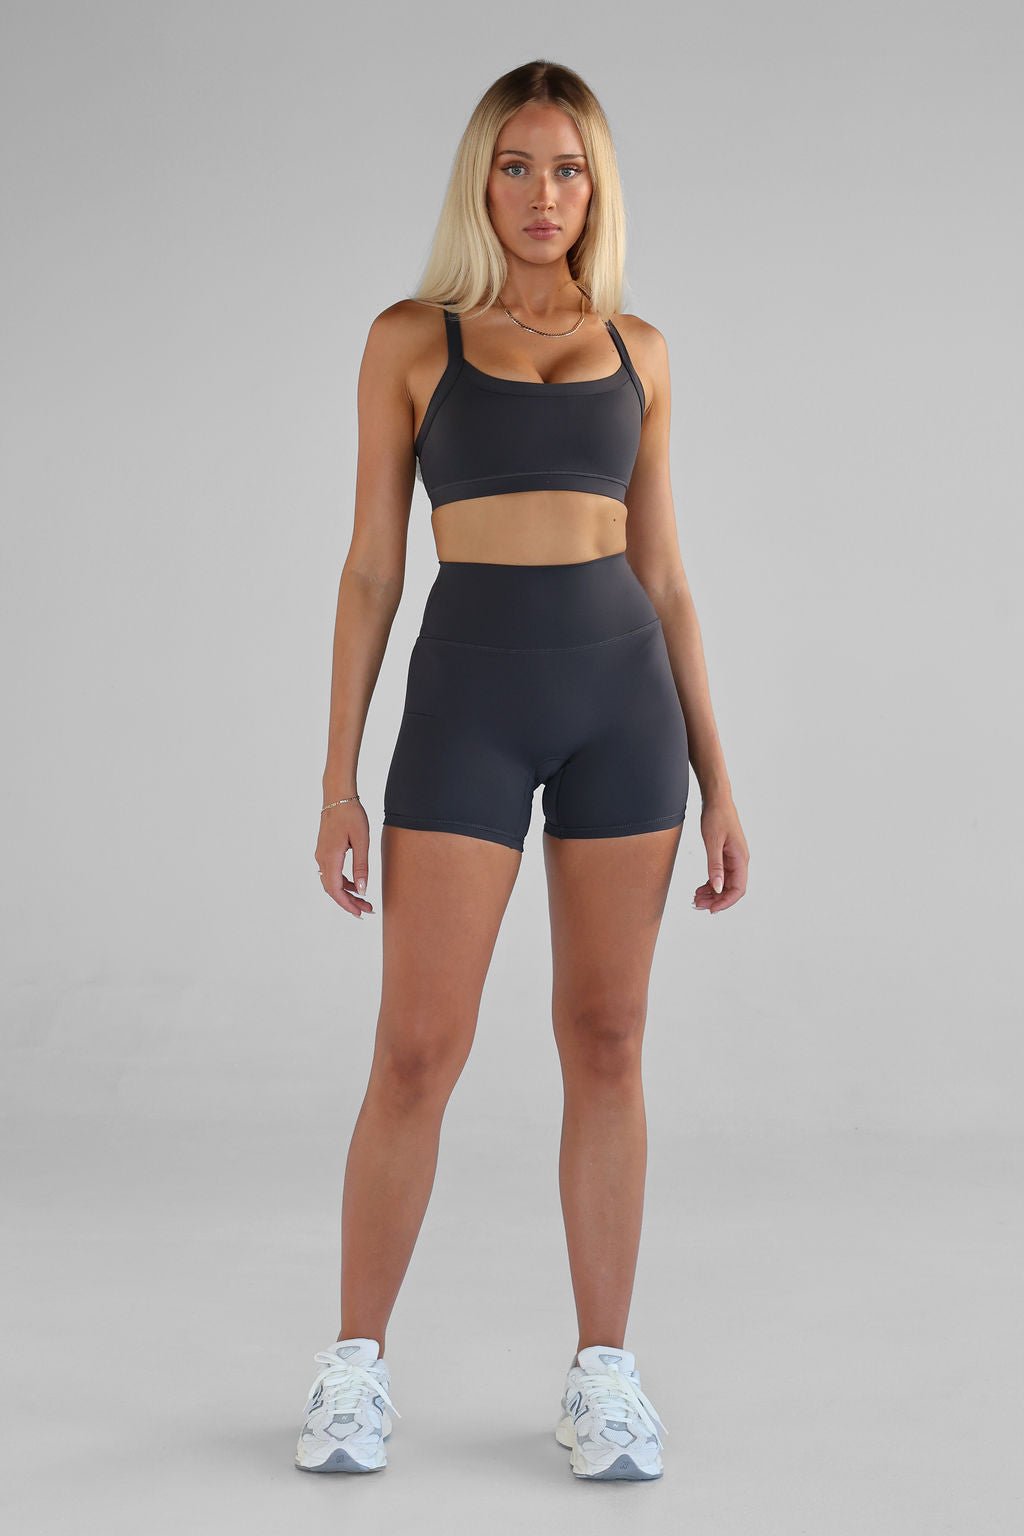 SCULPT Bike Shorts - Ash SHIPPING FROM 12/02 - LEELO ACTIVE